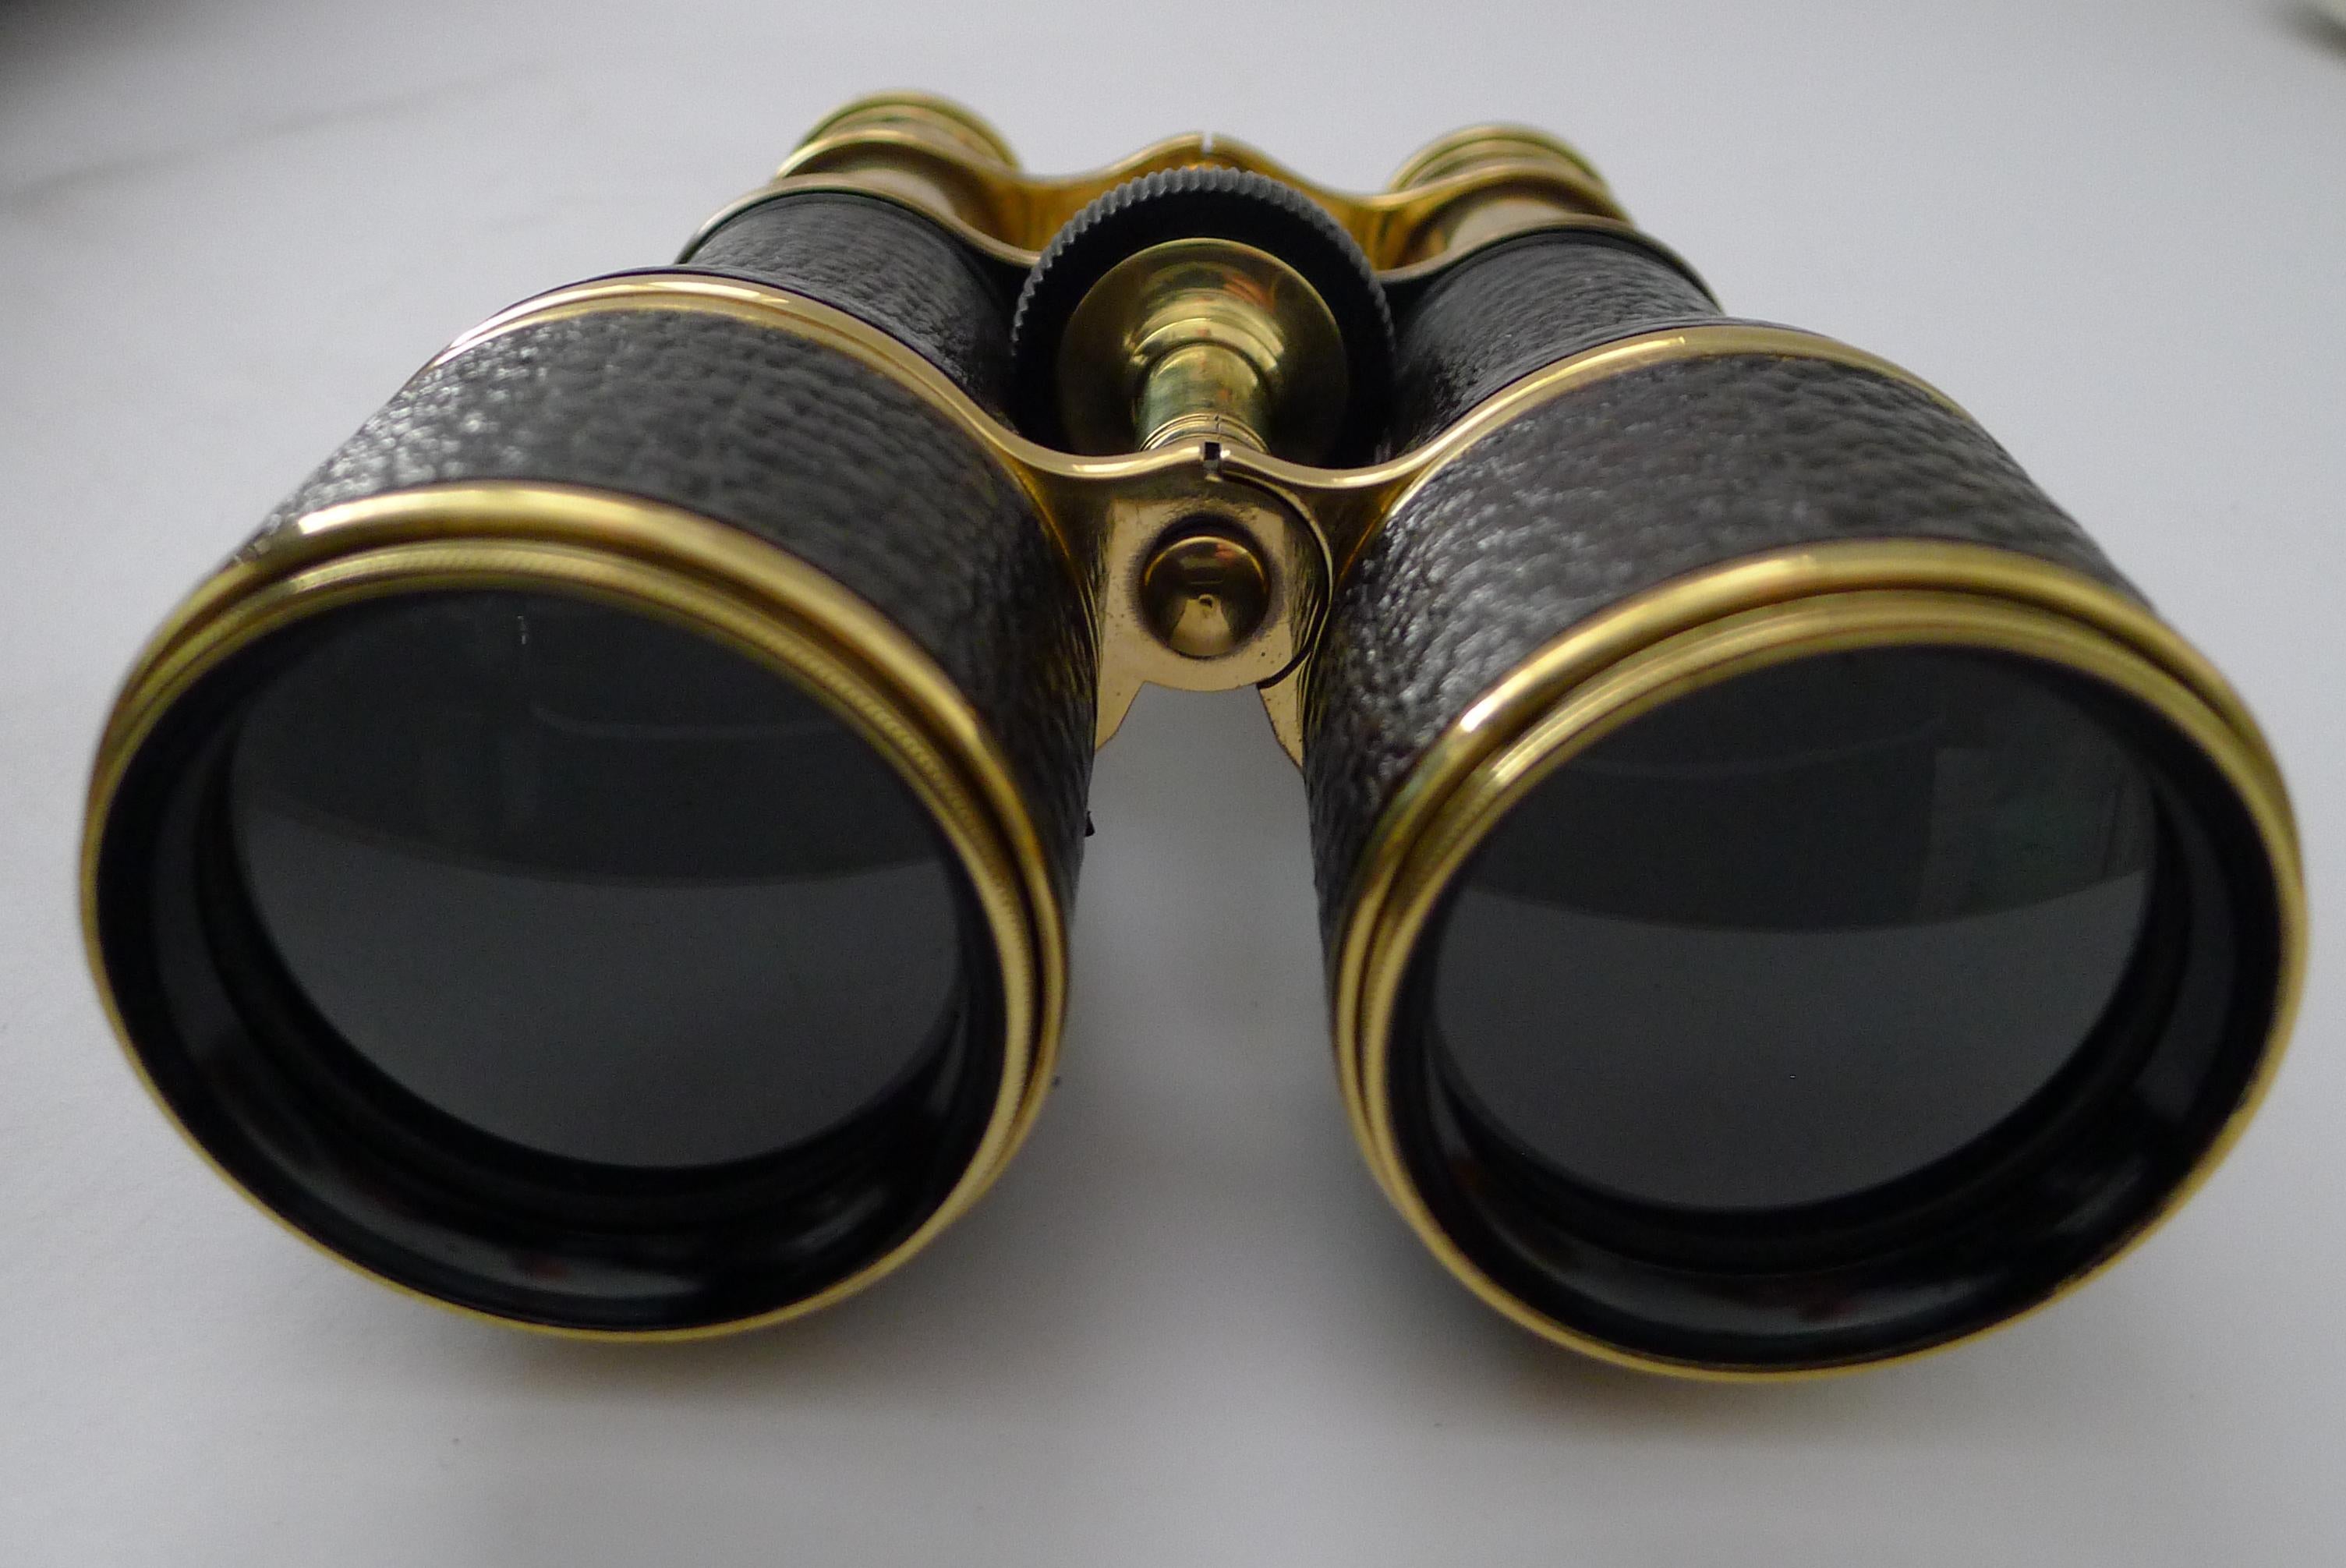 A wonderful pair of fully refurbished French made binoculars, stamped M G (Ministere de la Guerre) and signed by the famous maker, Colmont of Paris.

The brass has been meticulously professionally polished, a winning combination with the cognac